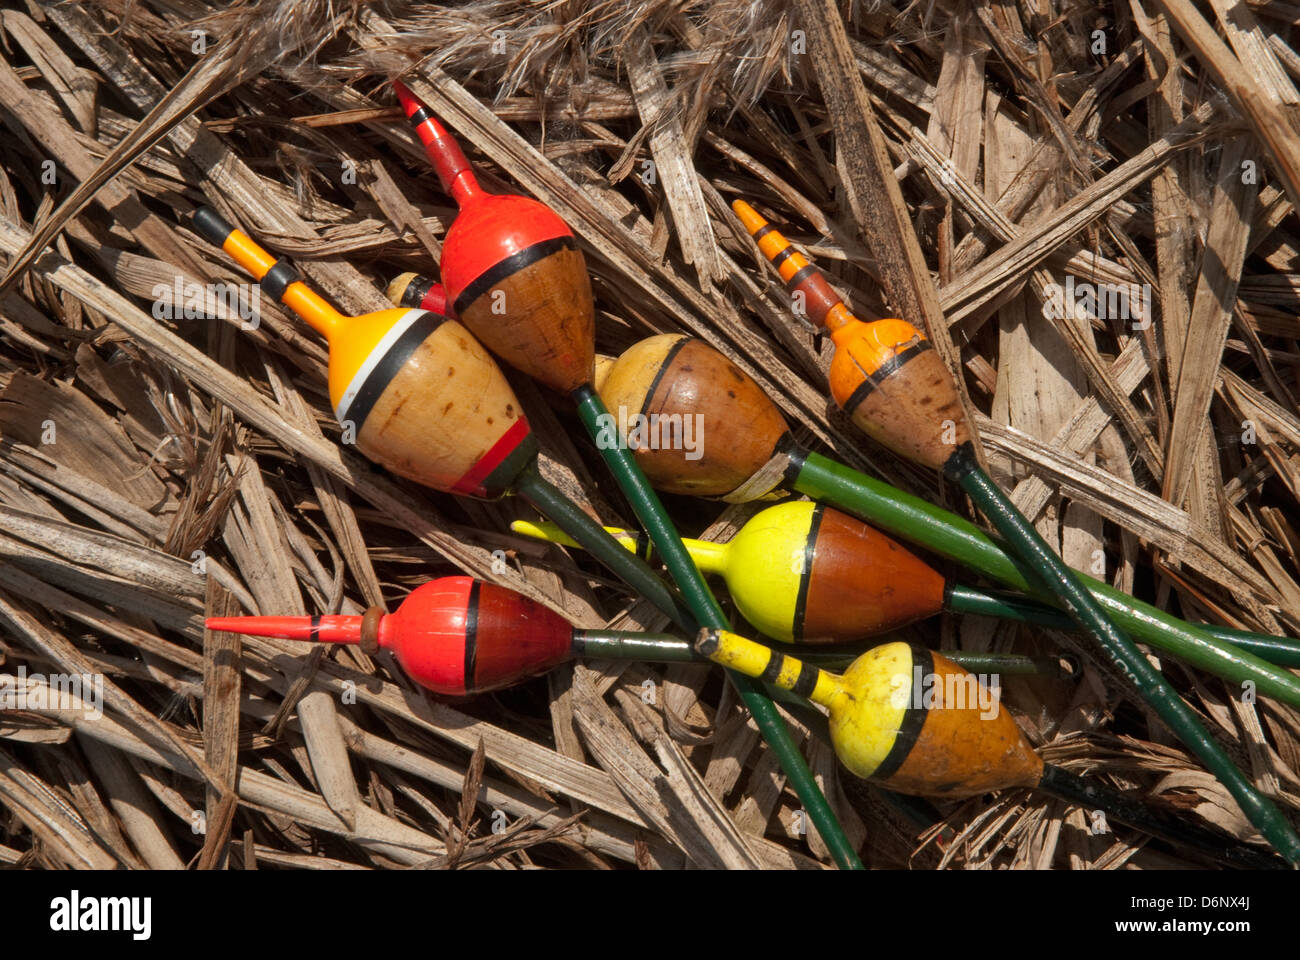 A selection of Freshwater cork bobber fishing floats Stock Photo